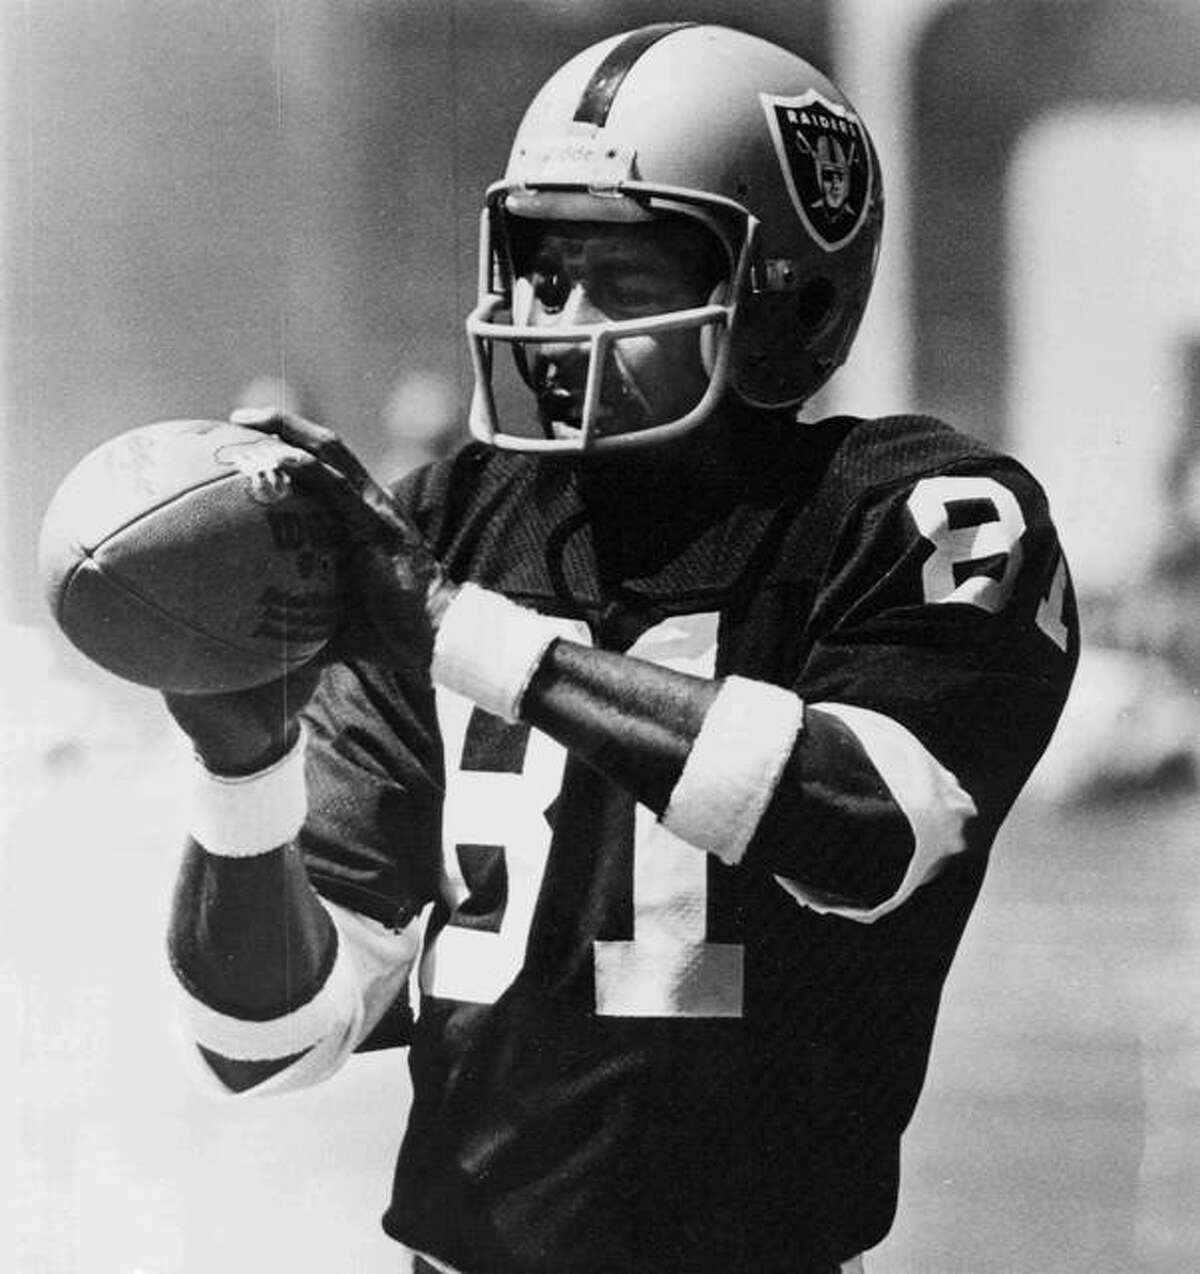 Edwardsville graduate Morris Bradshaw catches a pass for the Oakland Raiders. Bradshaw played for the Raiders from 1974 to 1981.